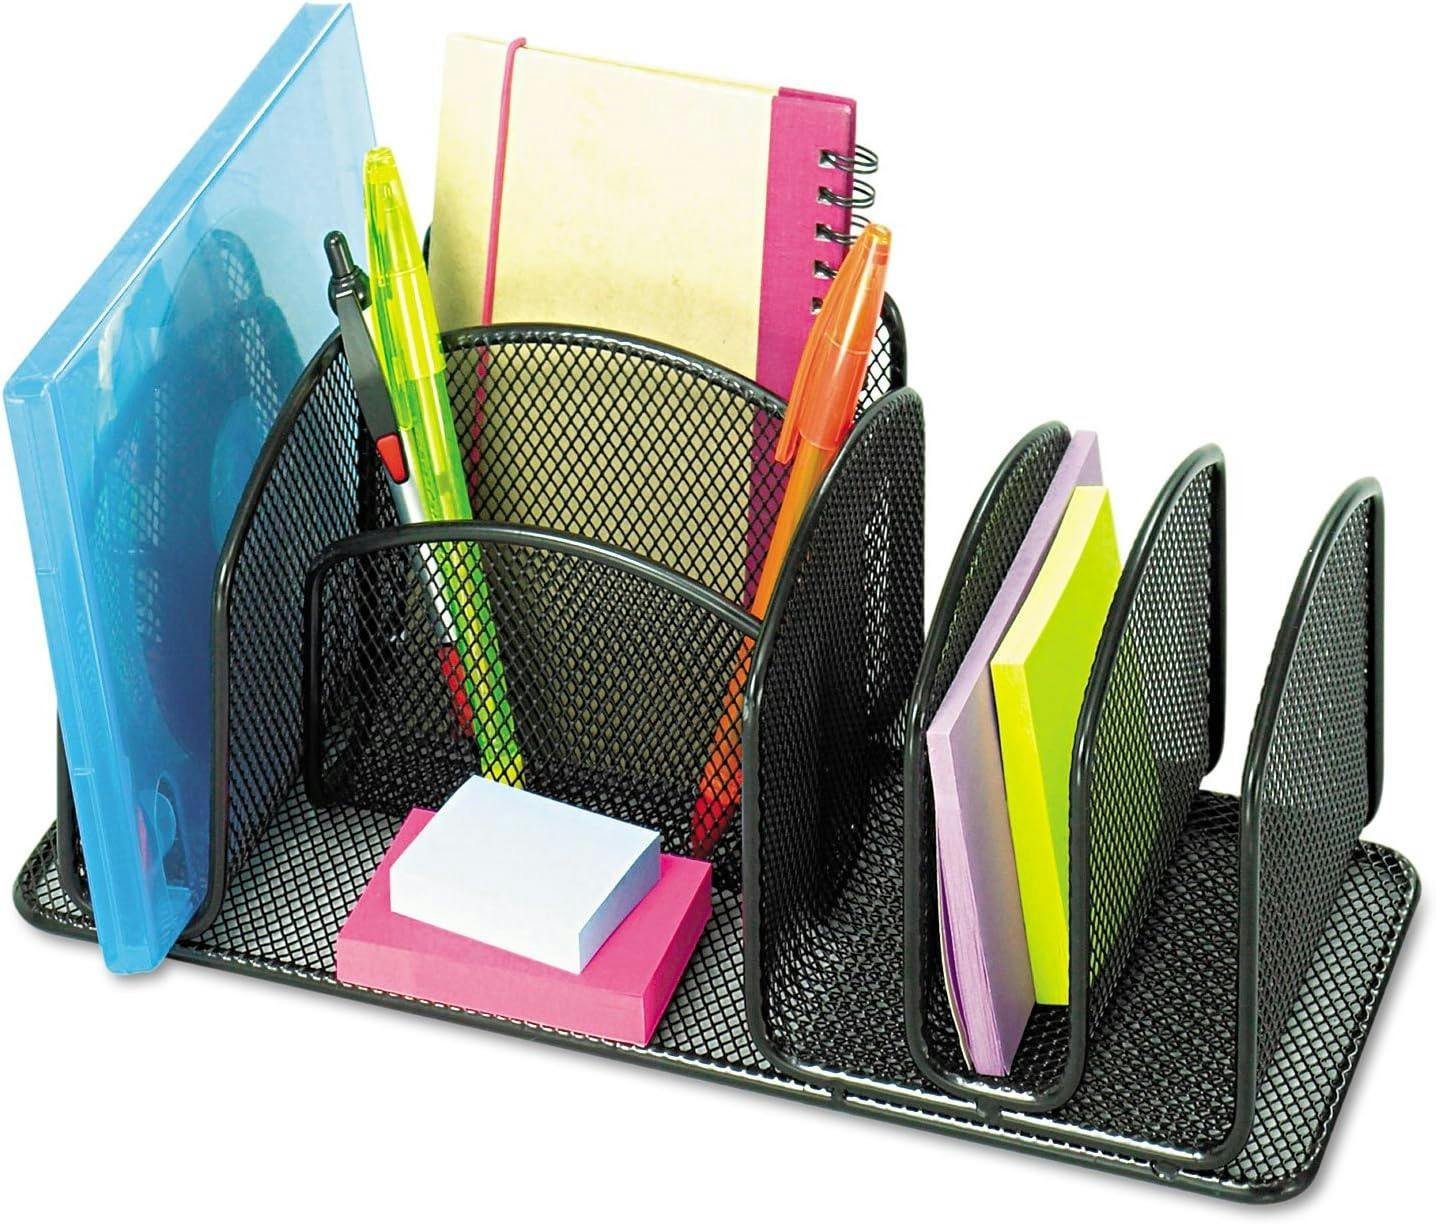 Onyx Deluxe Steel Mesh Desk Organizer with 6 Compartments in Black